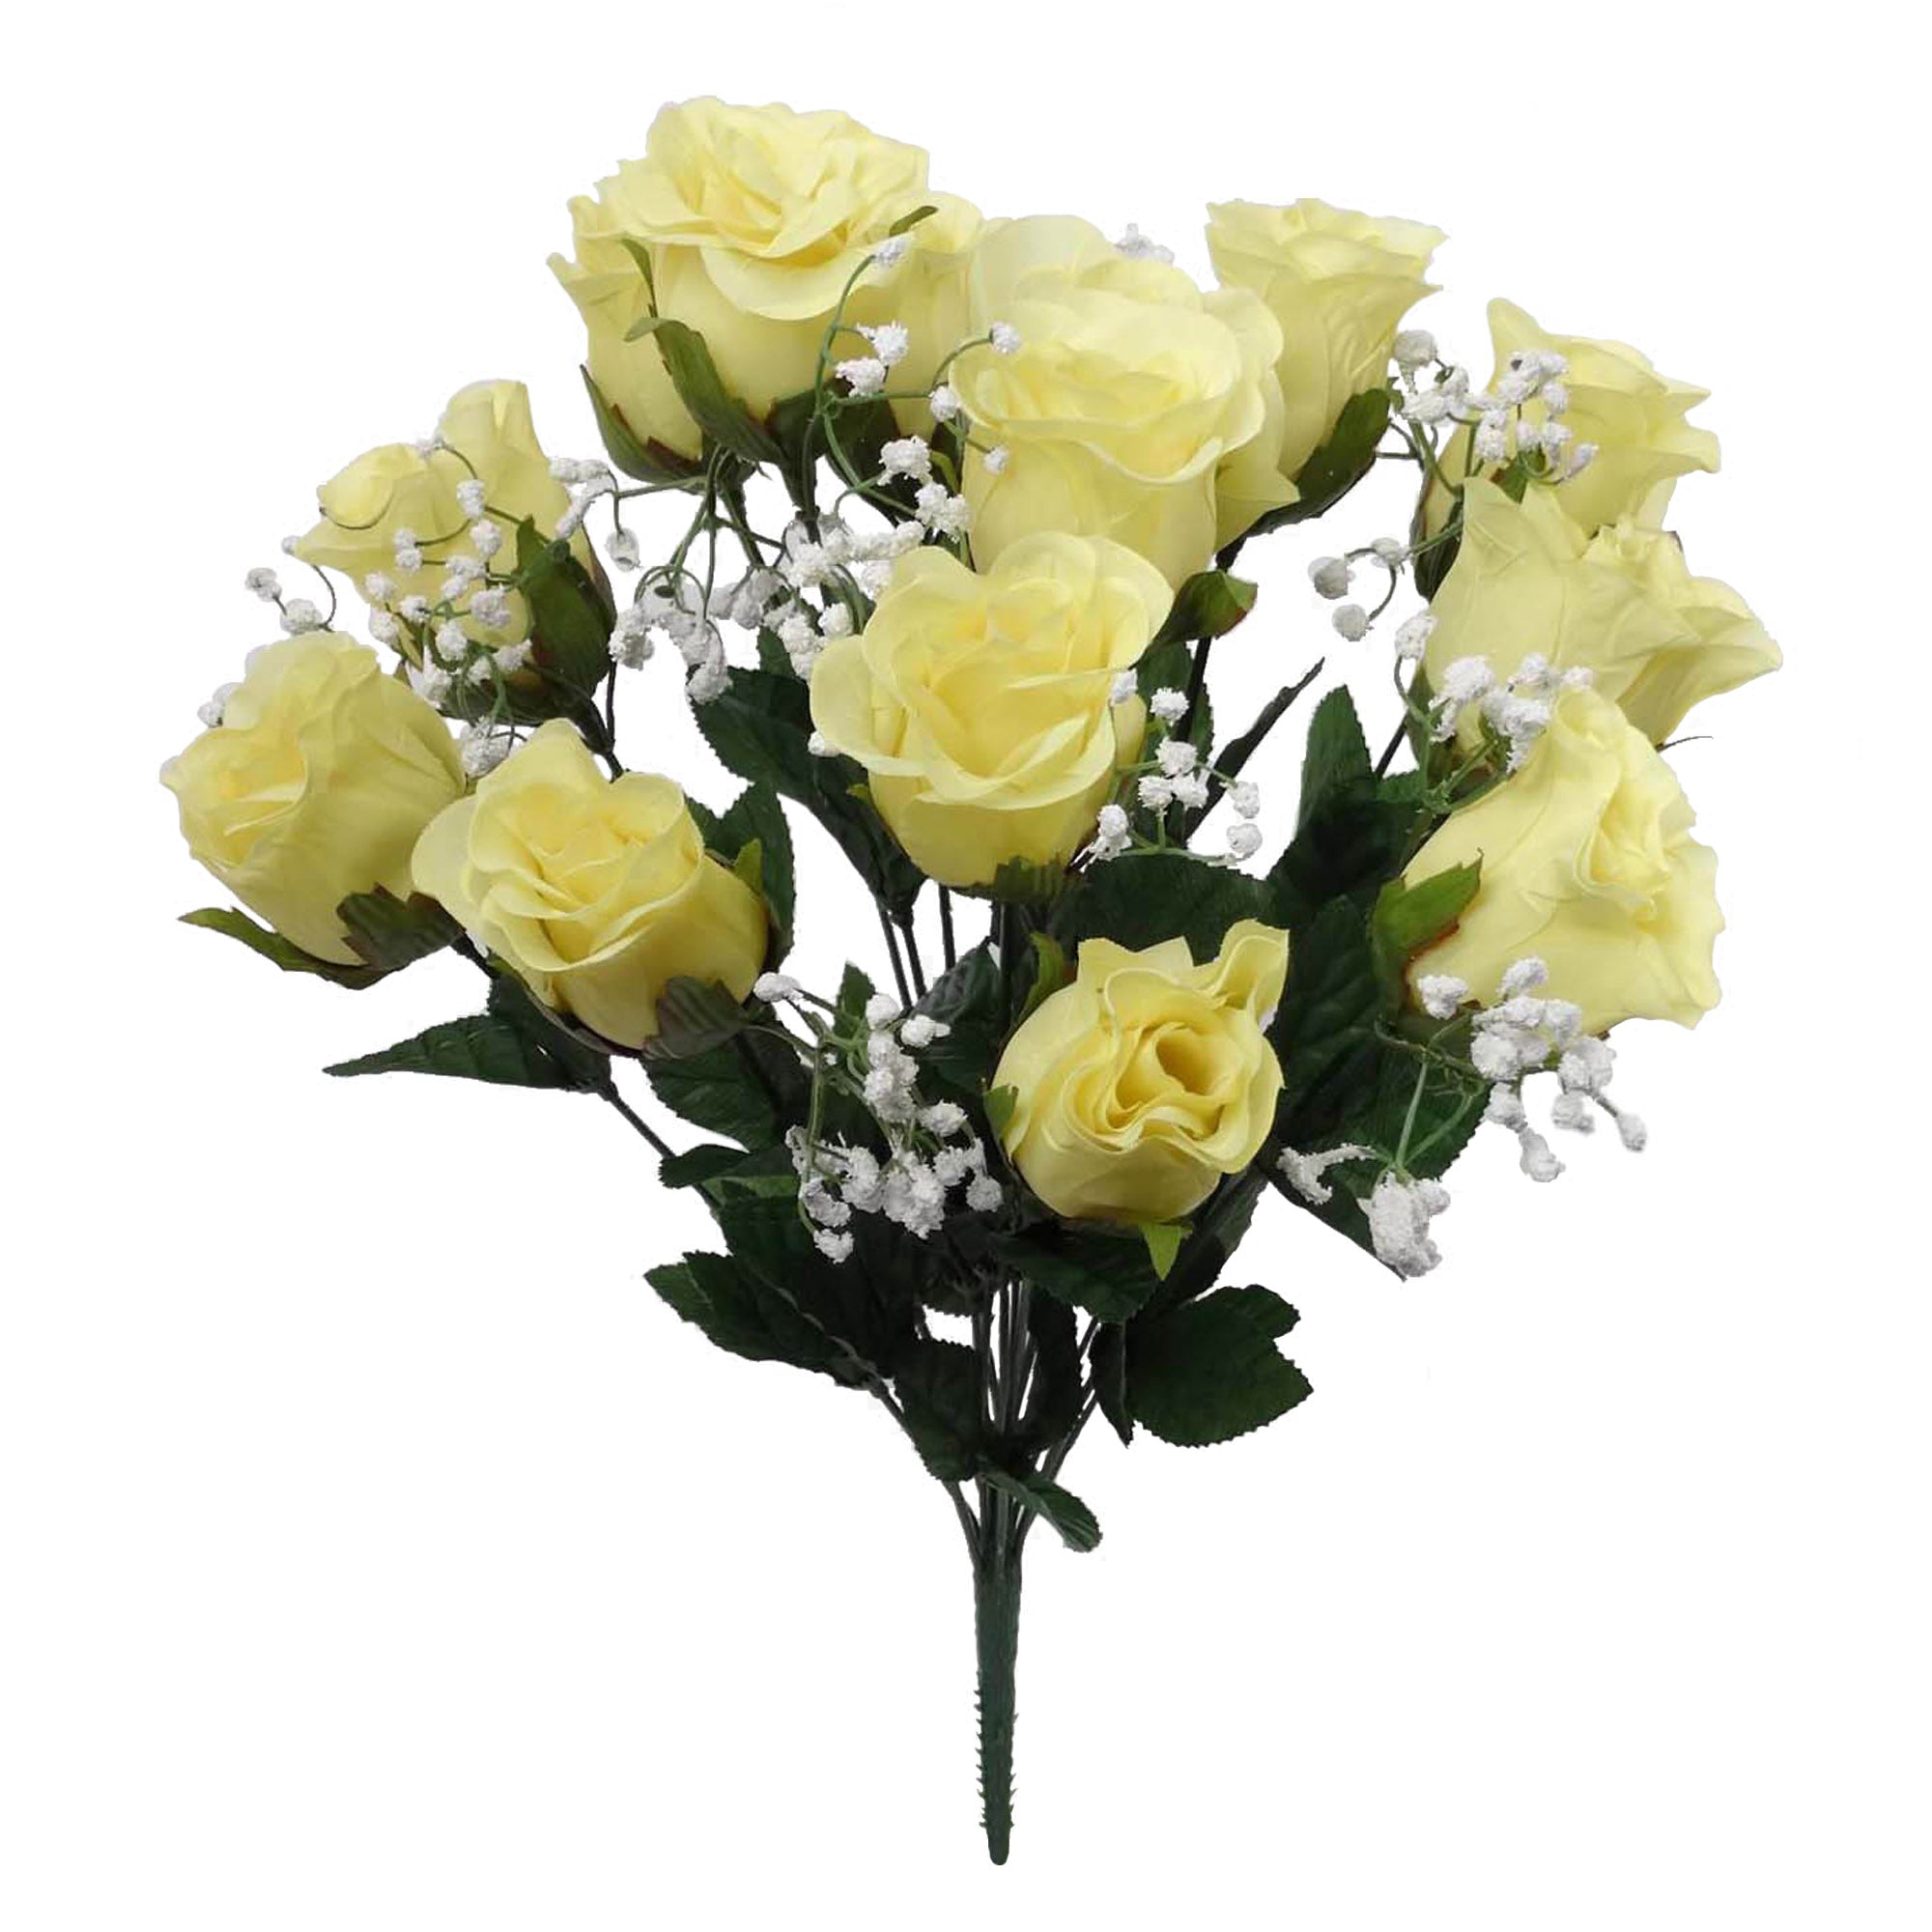 Sunny Yellow Rose Bud with GYP Bush X14 - Bright Faux Flowers for Home Decor, Weddings & Events